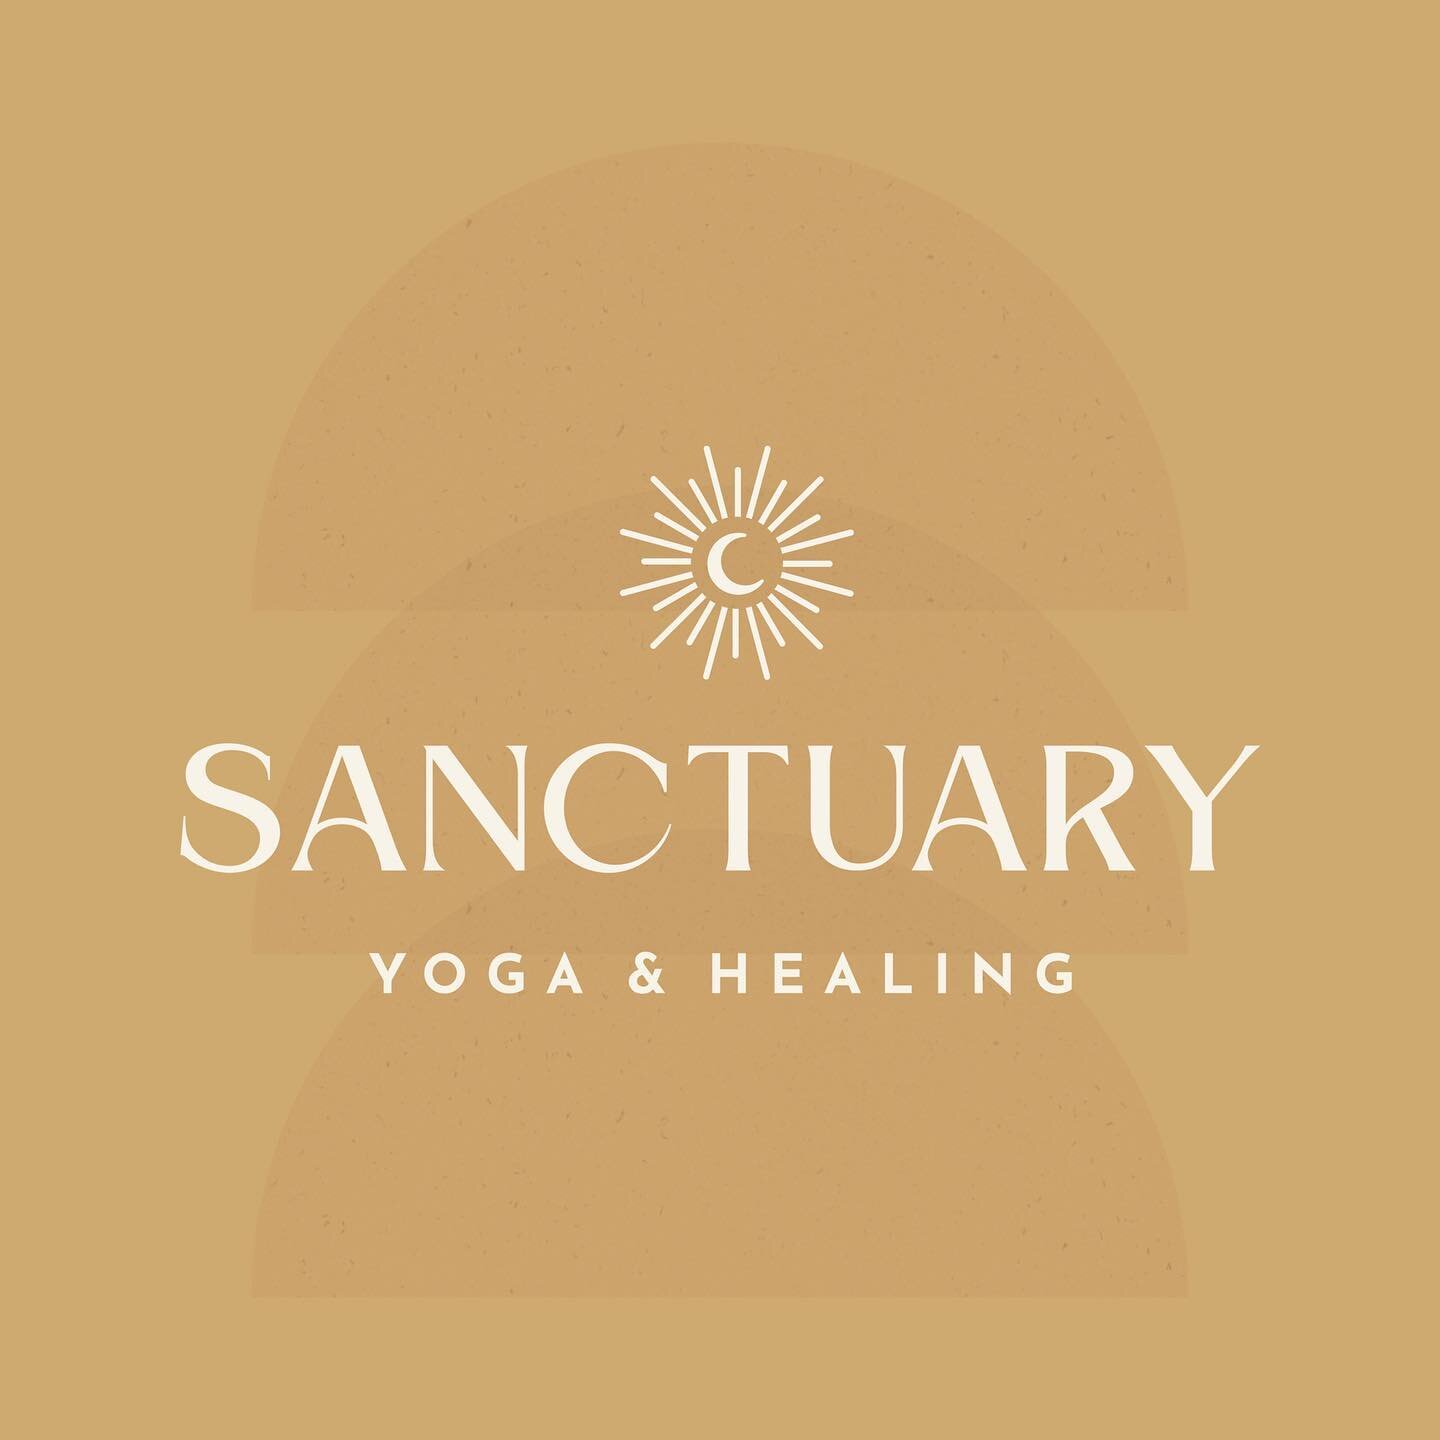 Gabby here 🙋🏼&zwj;♀️
✨
After years of dreaming and months (and months) of planning, Sanctuary Yoga &amp; Healing is finally a reality!
✨
Now, even though we&rsquo;re still waiting for our brick-and-mortar to be...well brick and mortar, I just could